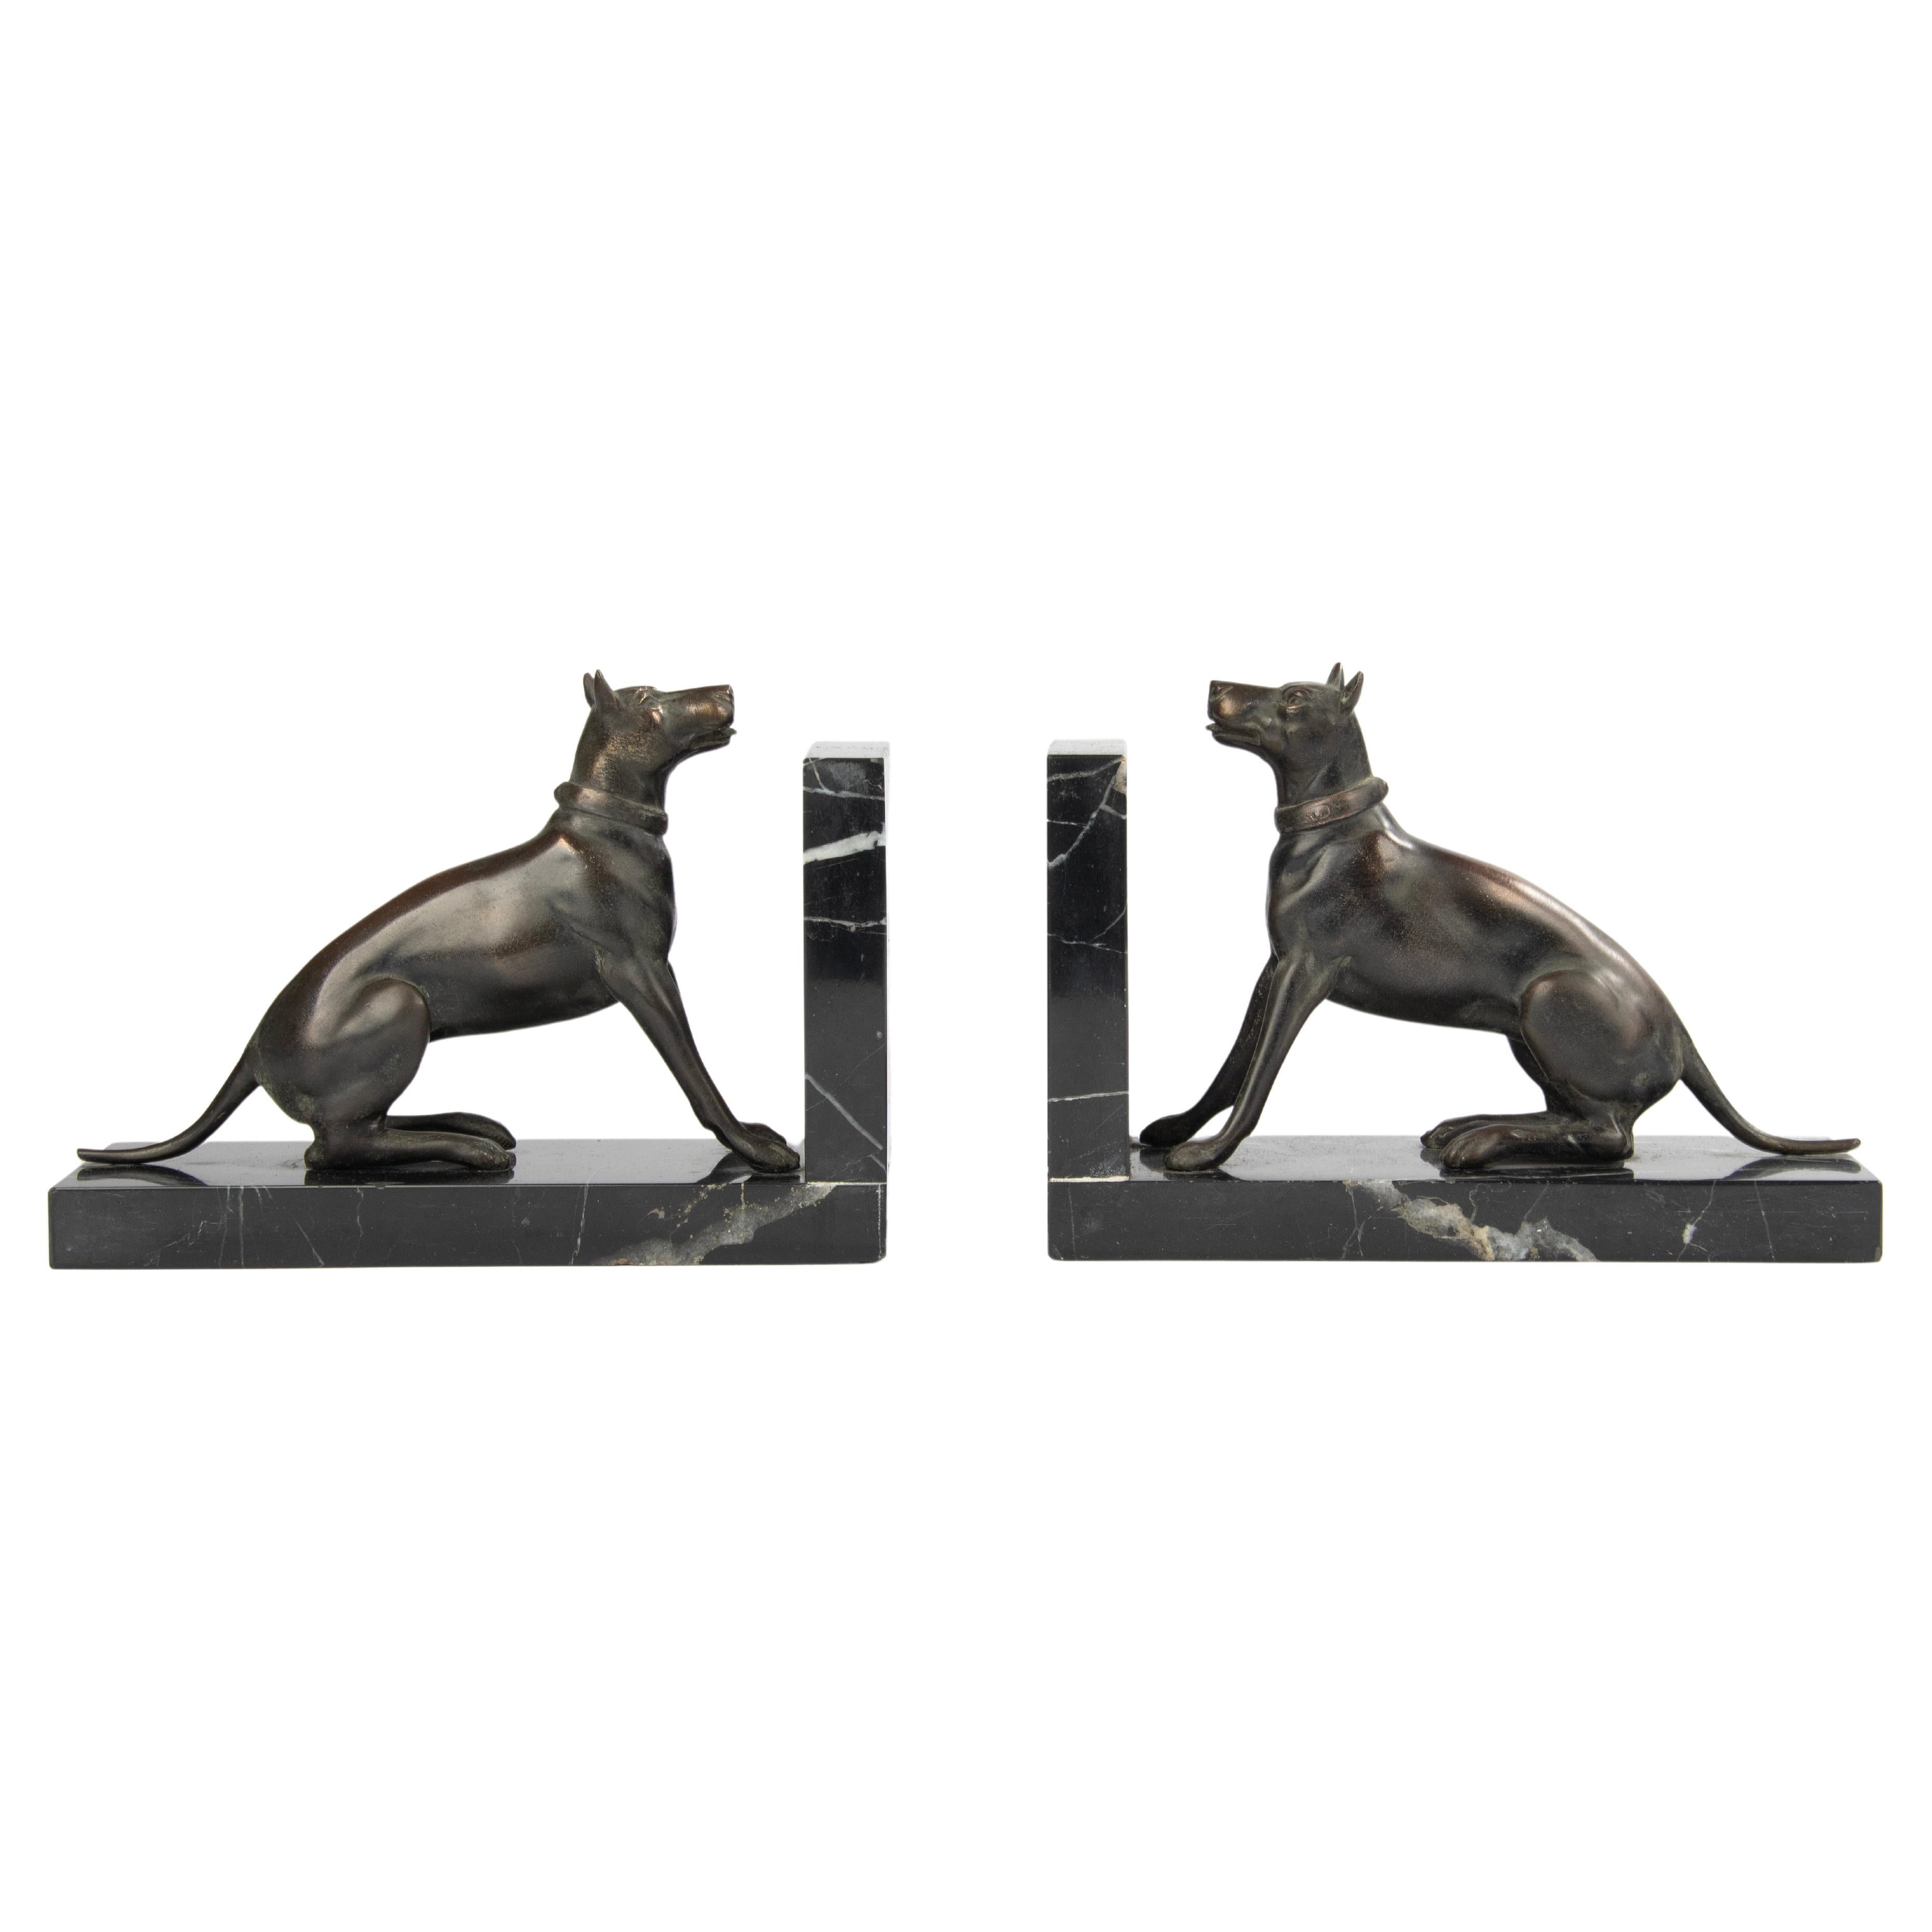 Early 20th Century Patinated Spelter and Marble Bookends with Danish Dogs